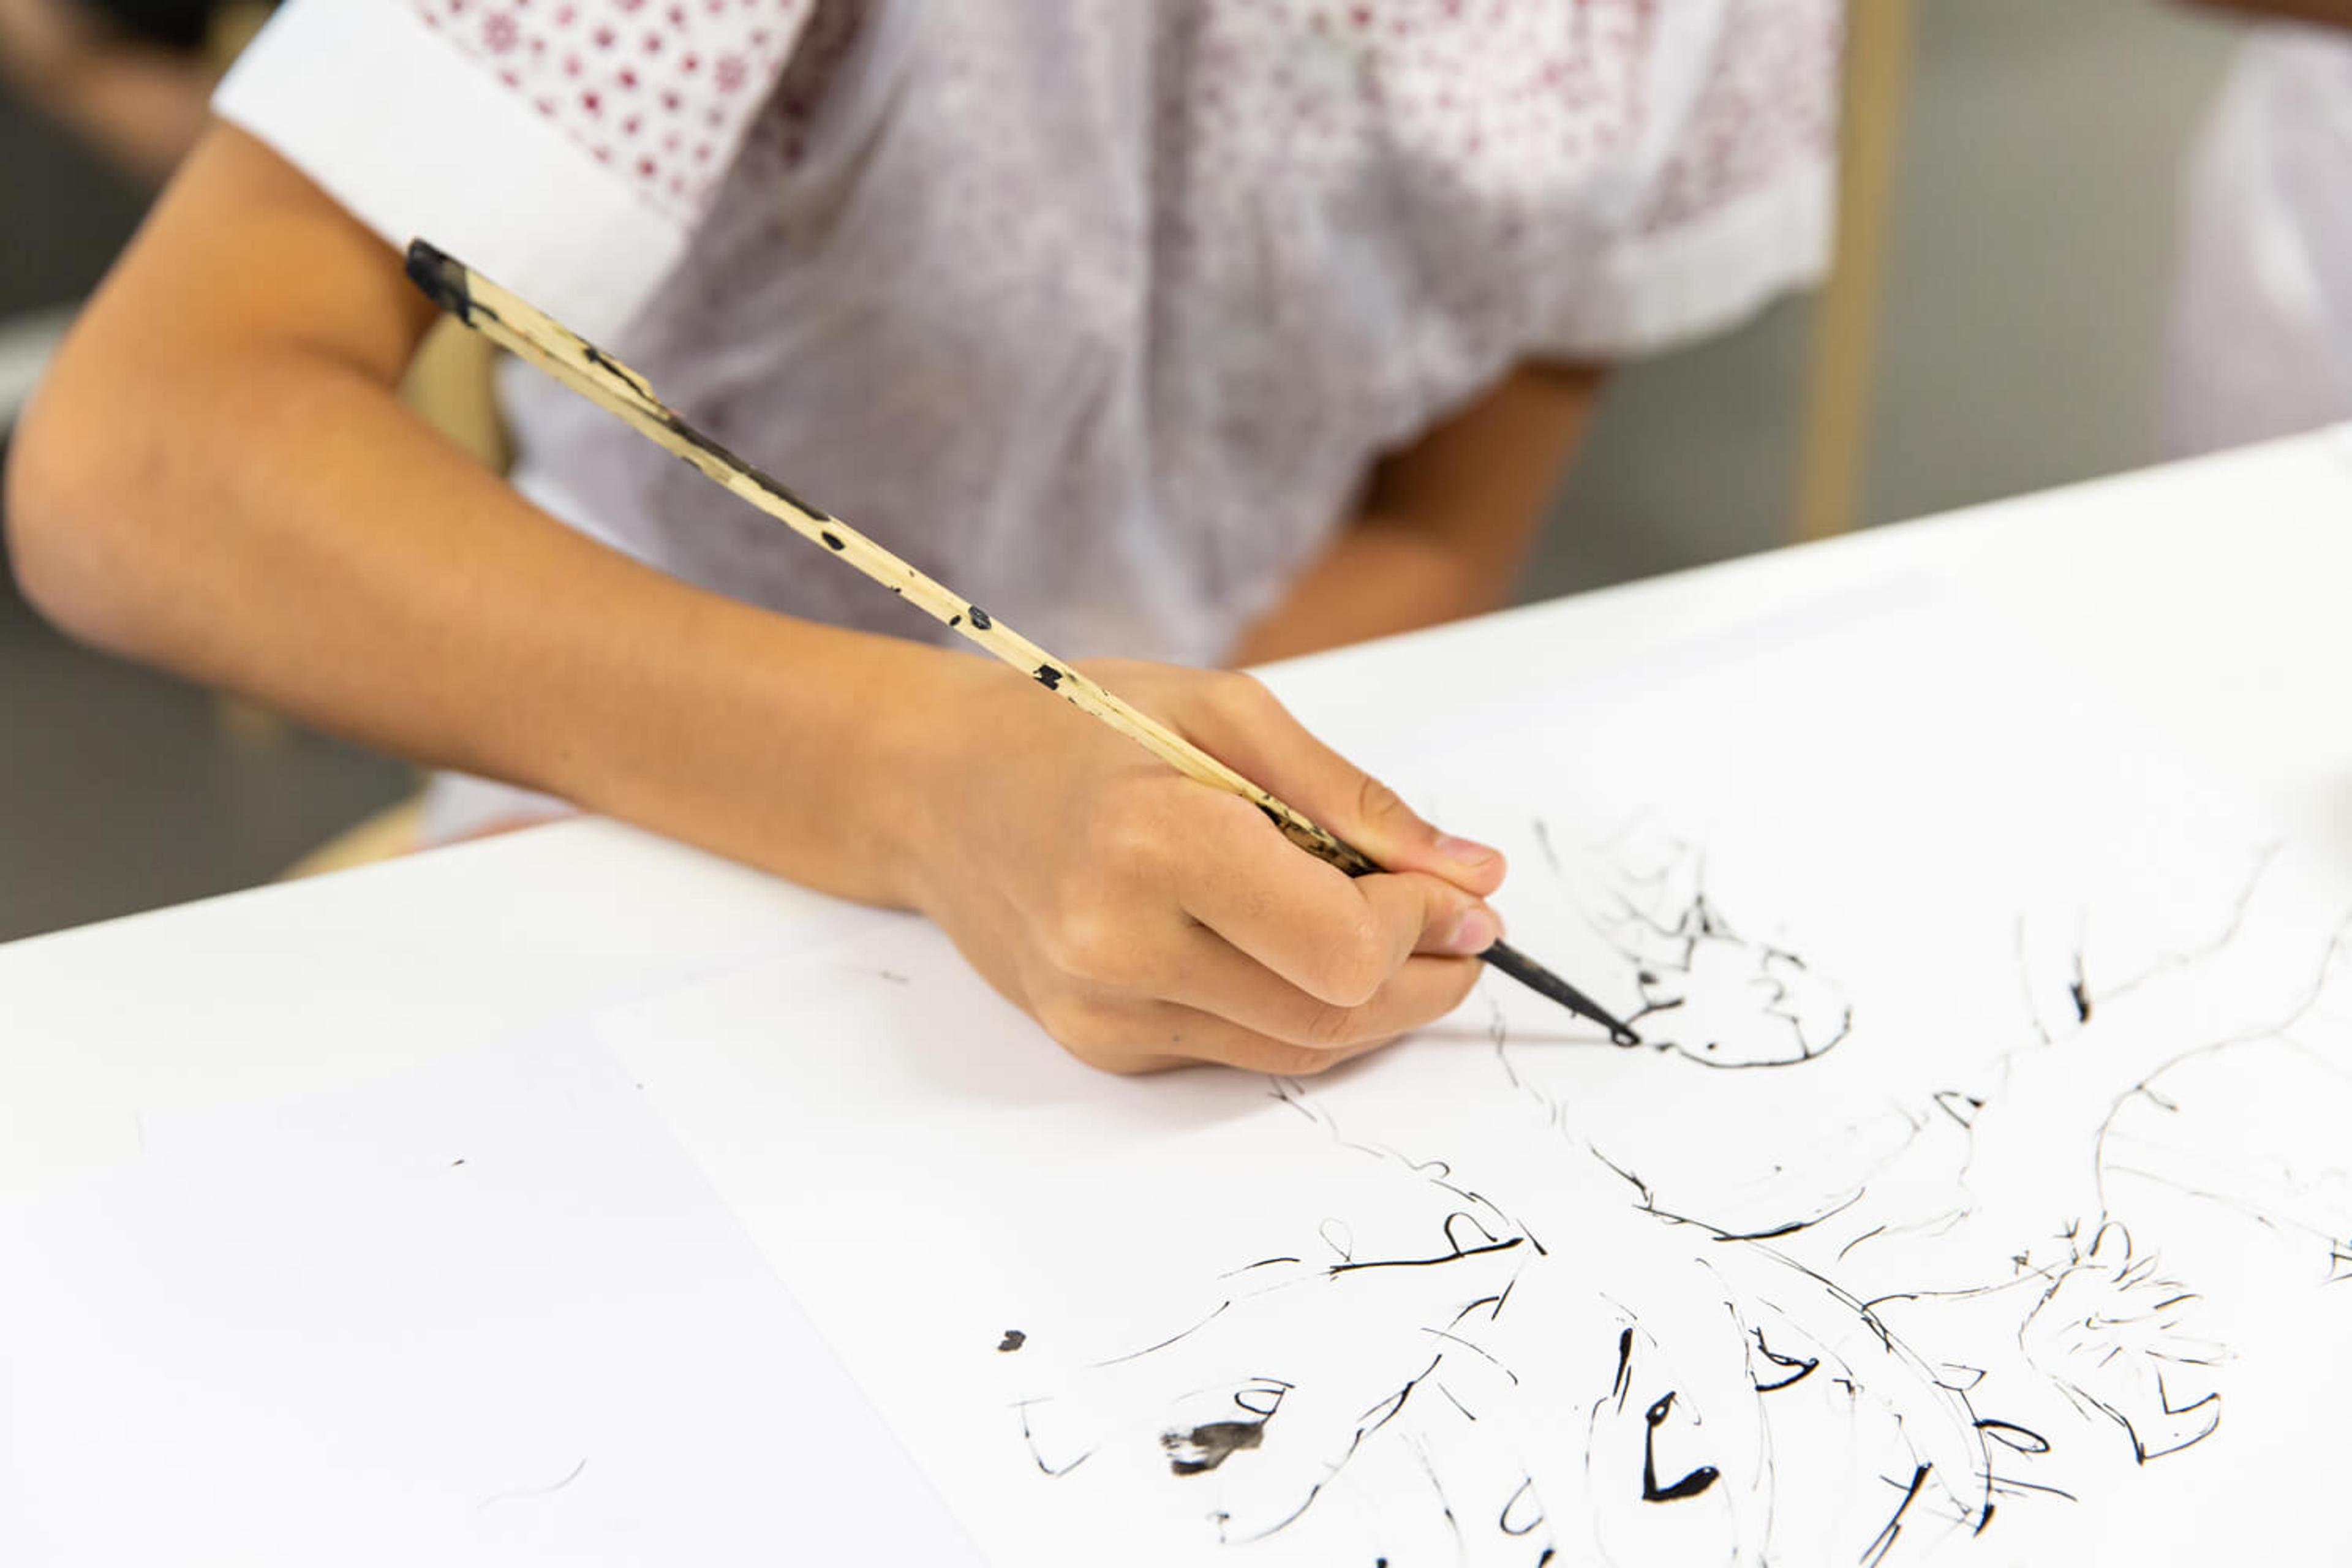 Photograph of a child painting with a long paint brush.